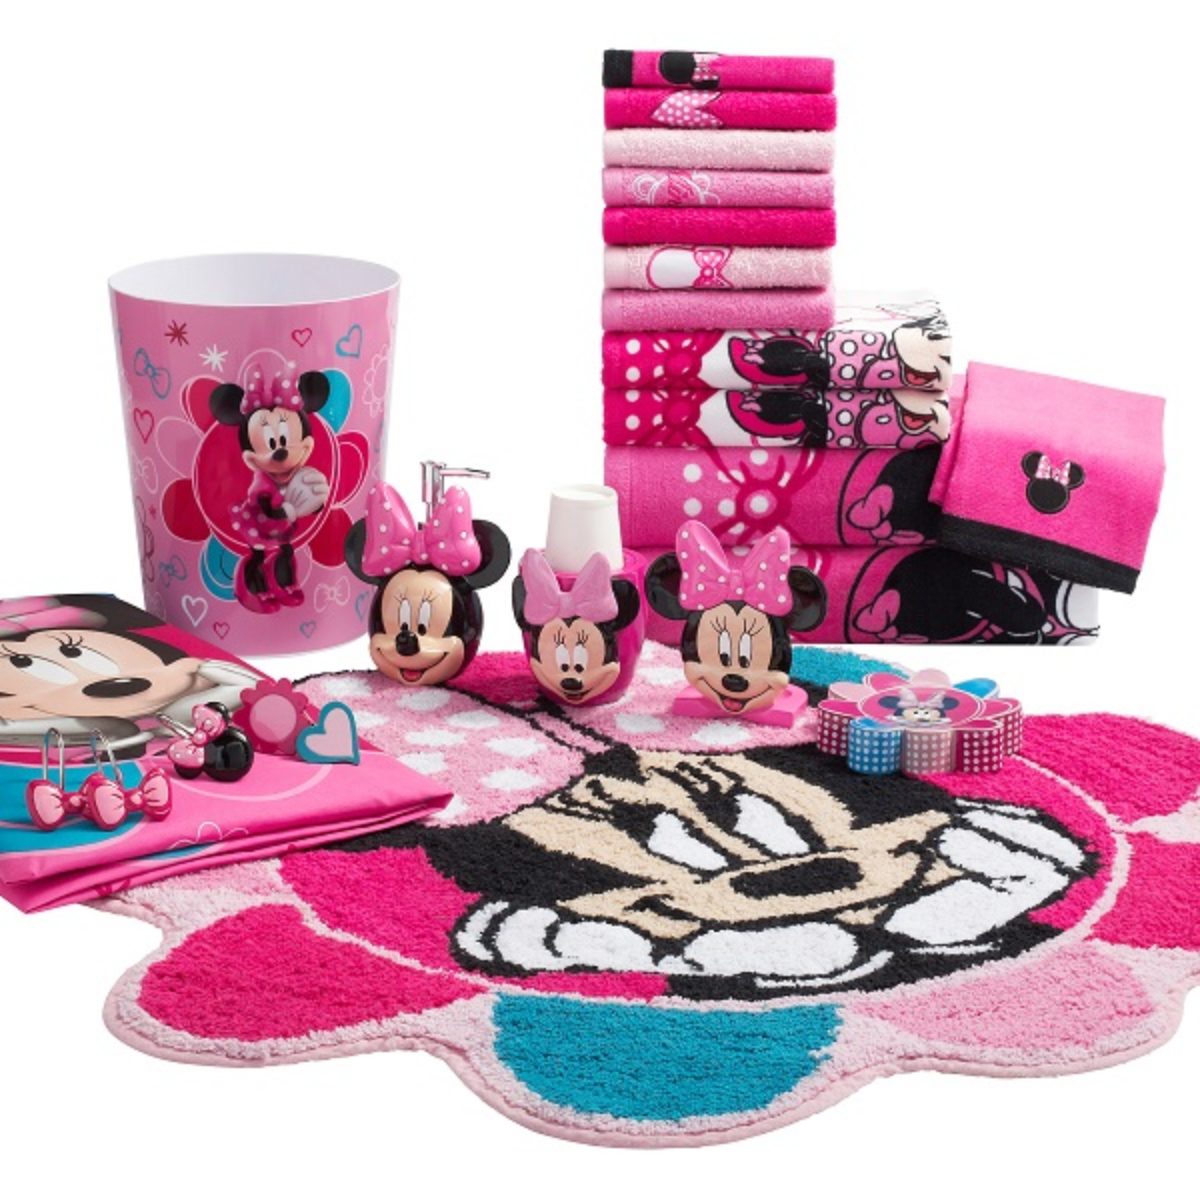 10 Catchy And Inviting Minnie Mouse Bathroom Set Ideas